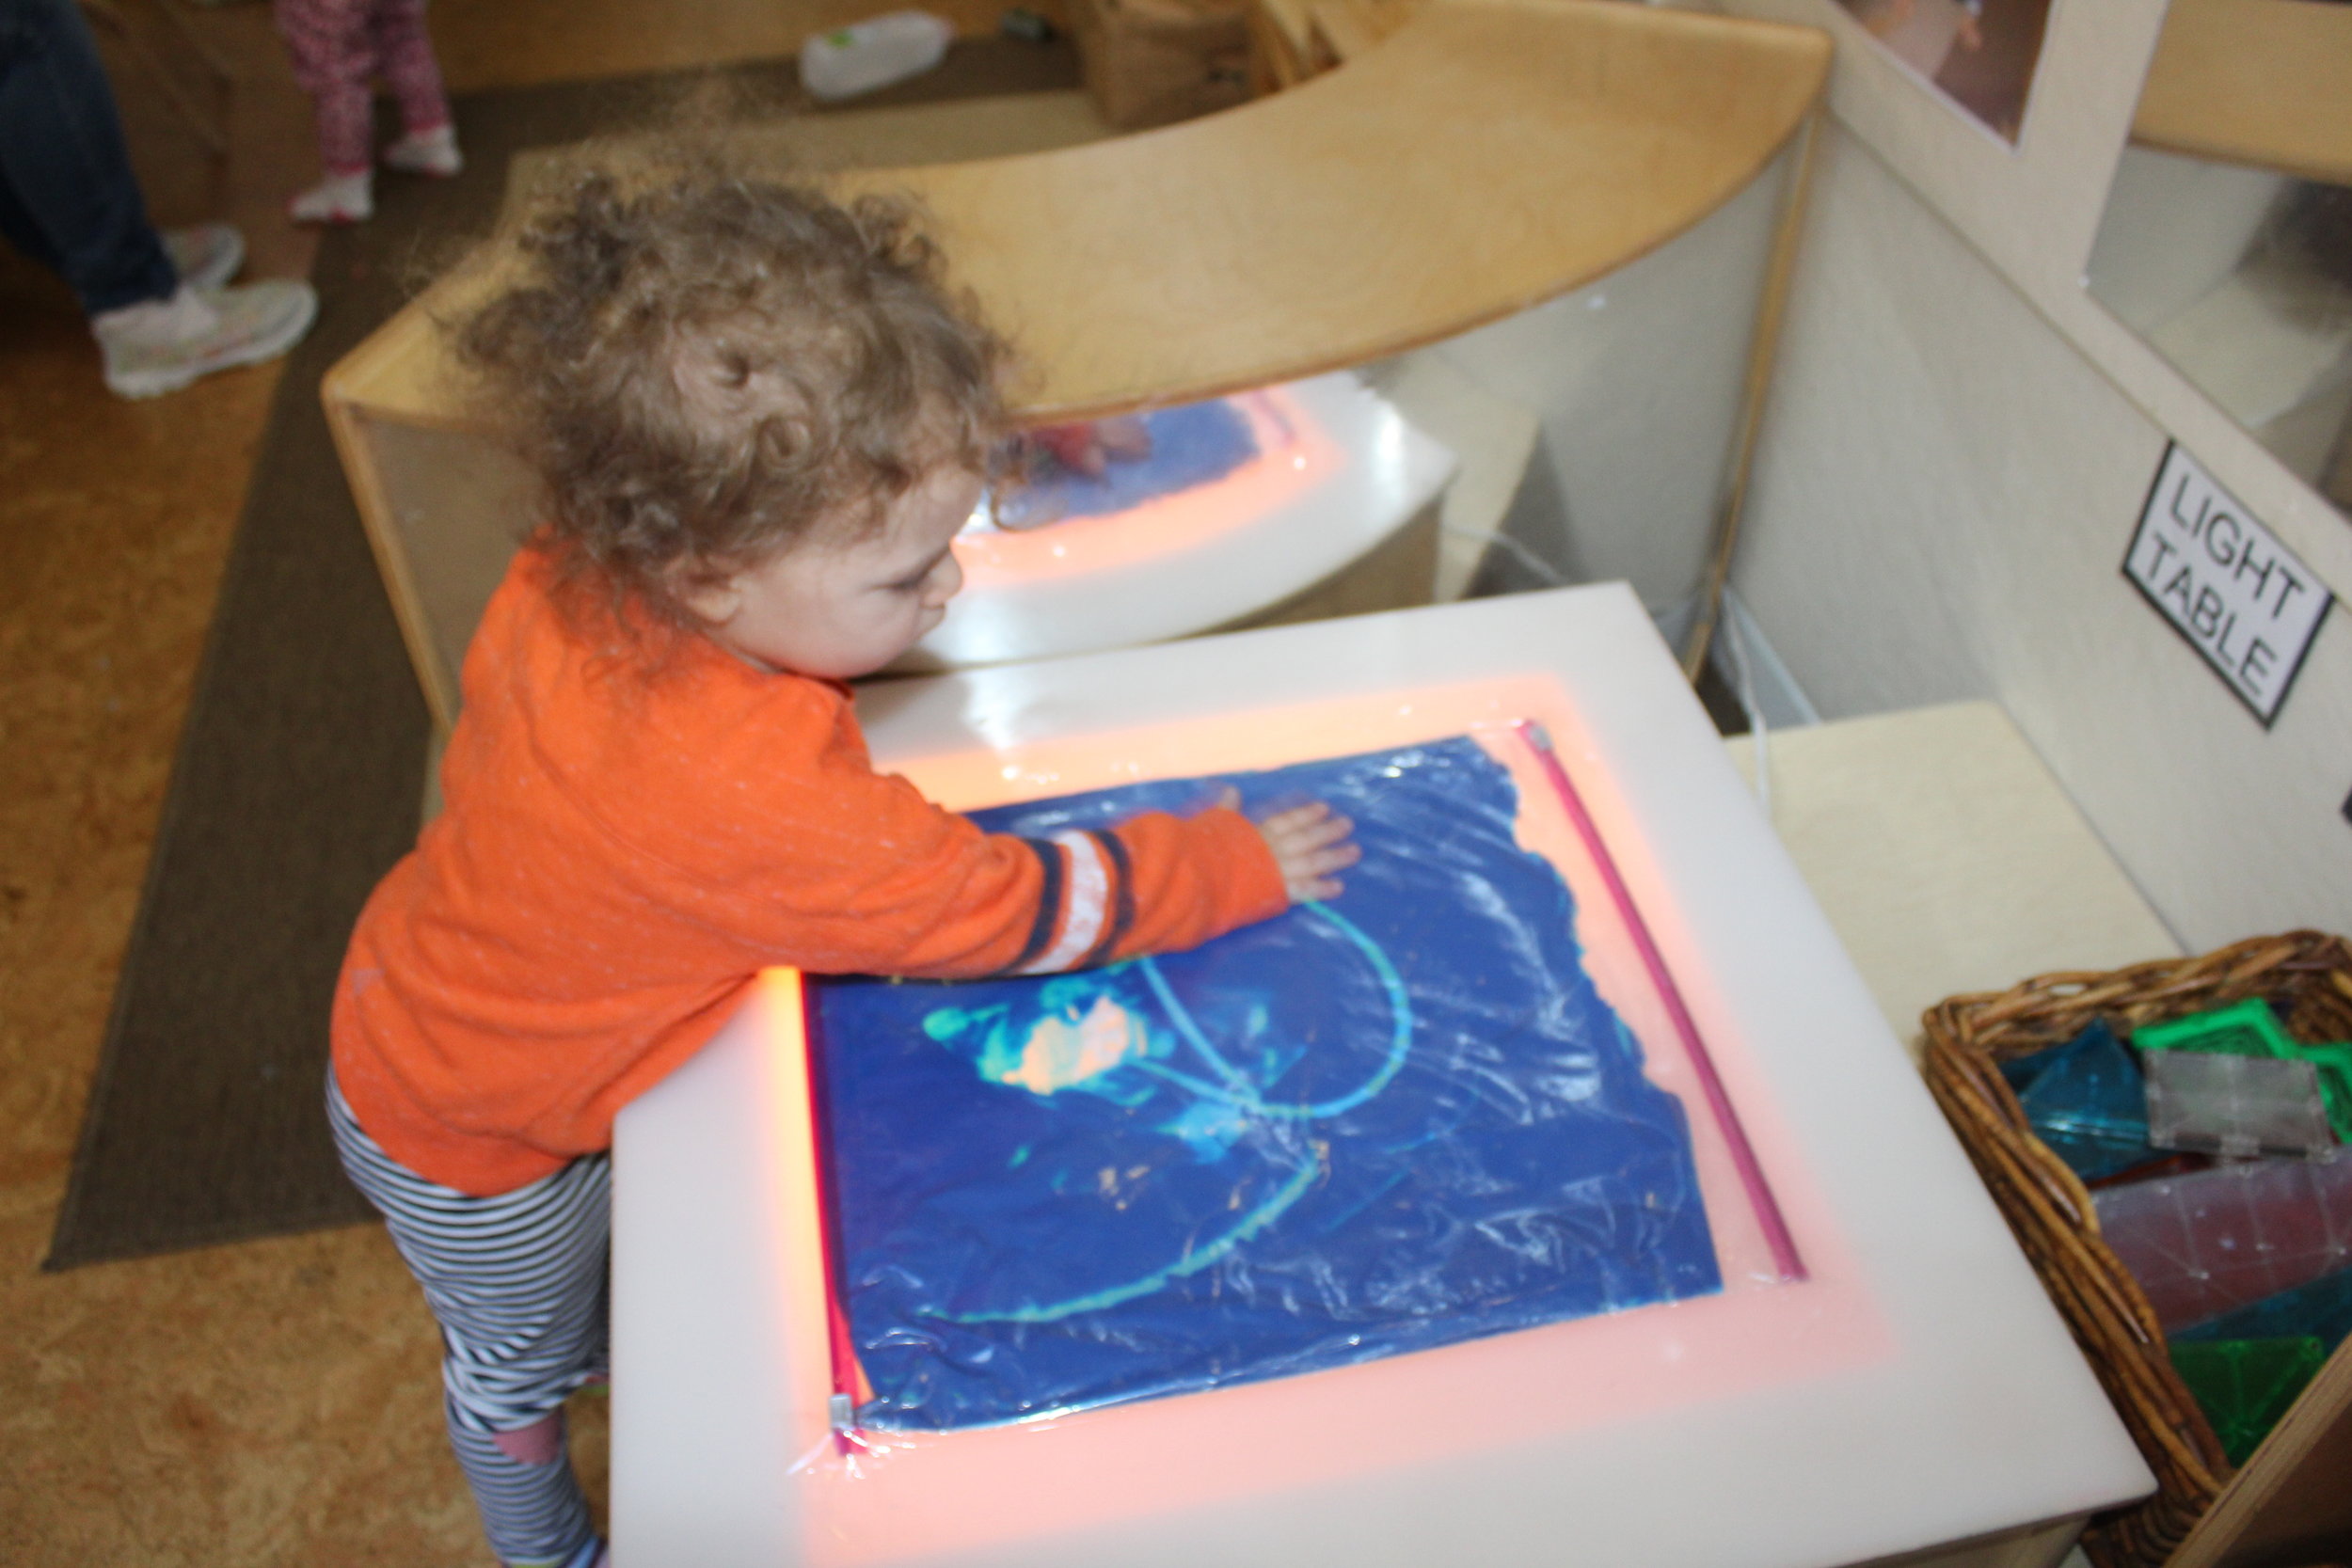     Exploring the color blue using a Ziploc Bag, creates a sensory experience.&nbsp; The children are not only internalizing the color blue but are patting, pressing and forming different imprints with their fingers.&nbsp; They are also observing the